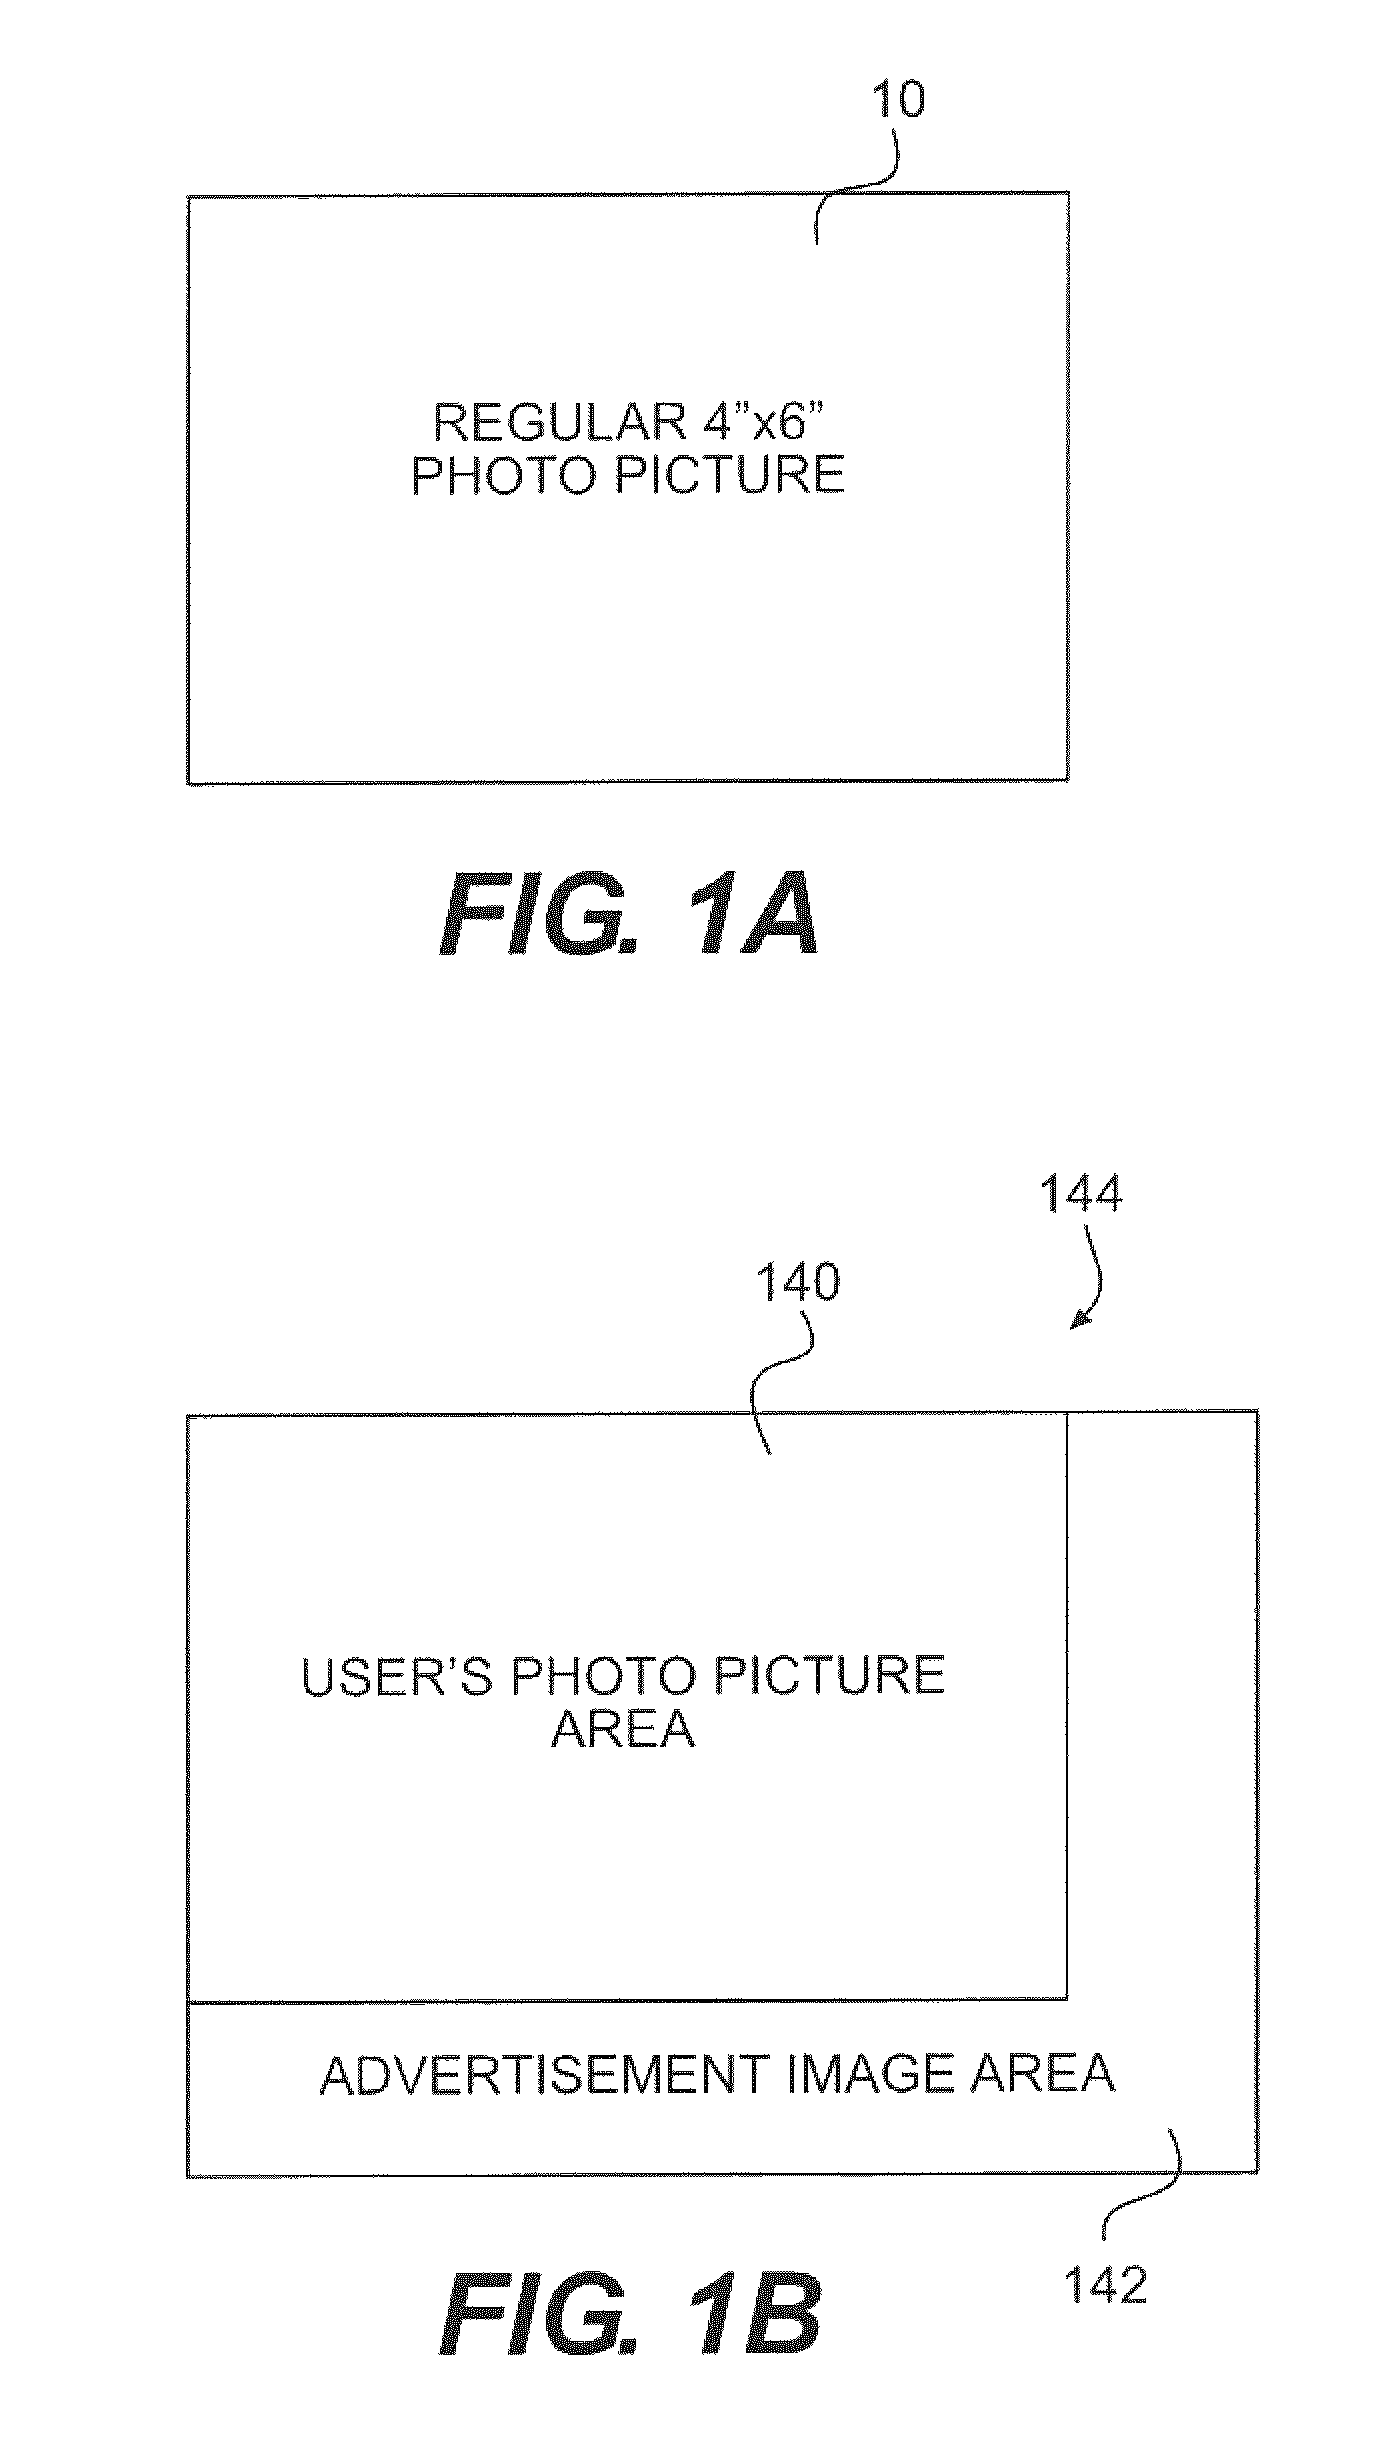 Method and system for distributing consumer photograph-based advertisement and/or information